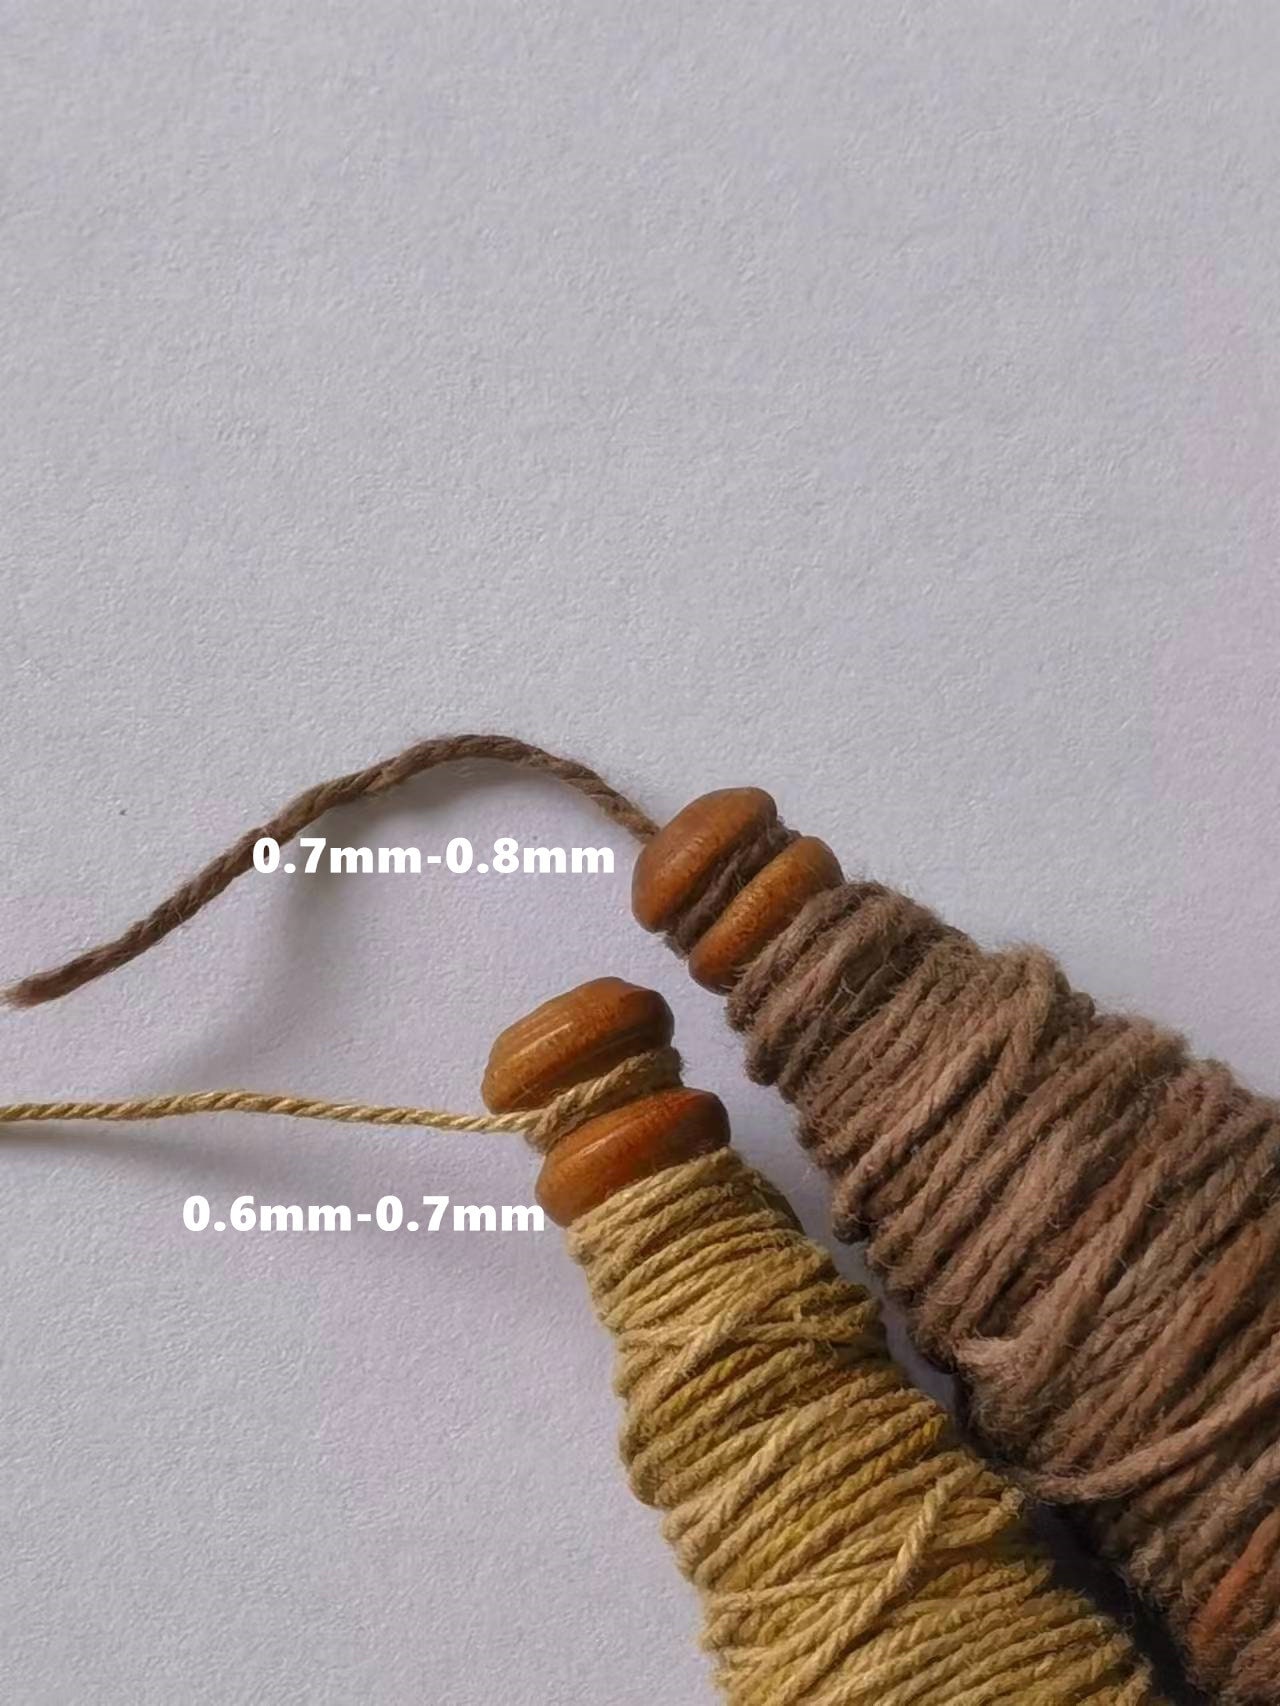 100% Natural linen cotton 2 plys yarn Diameter about 0.6mm weight